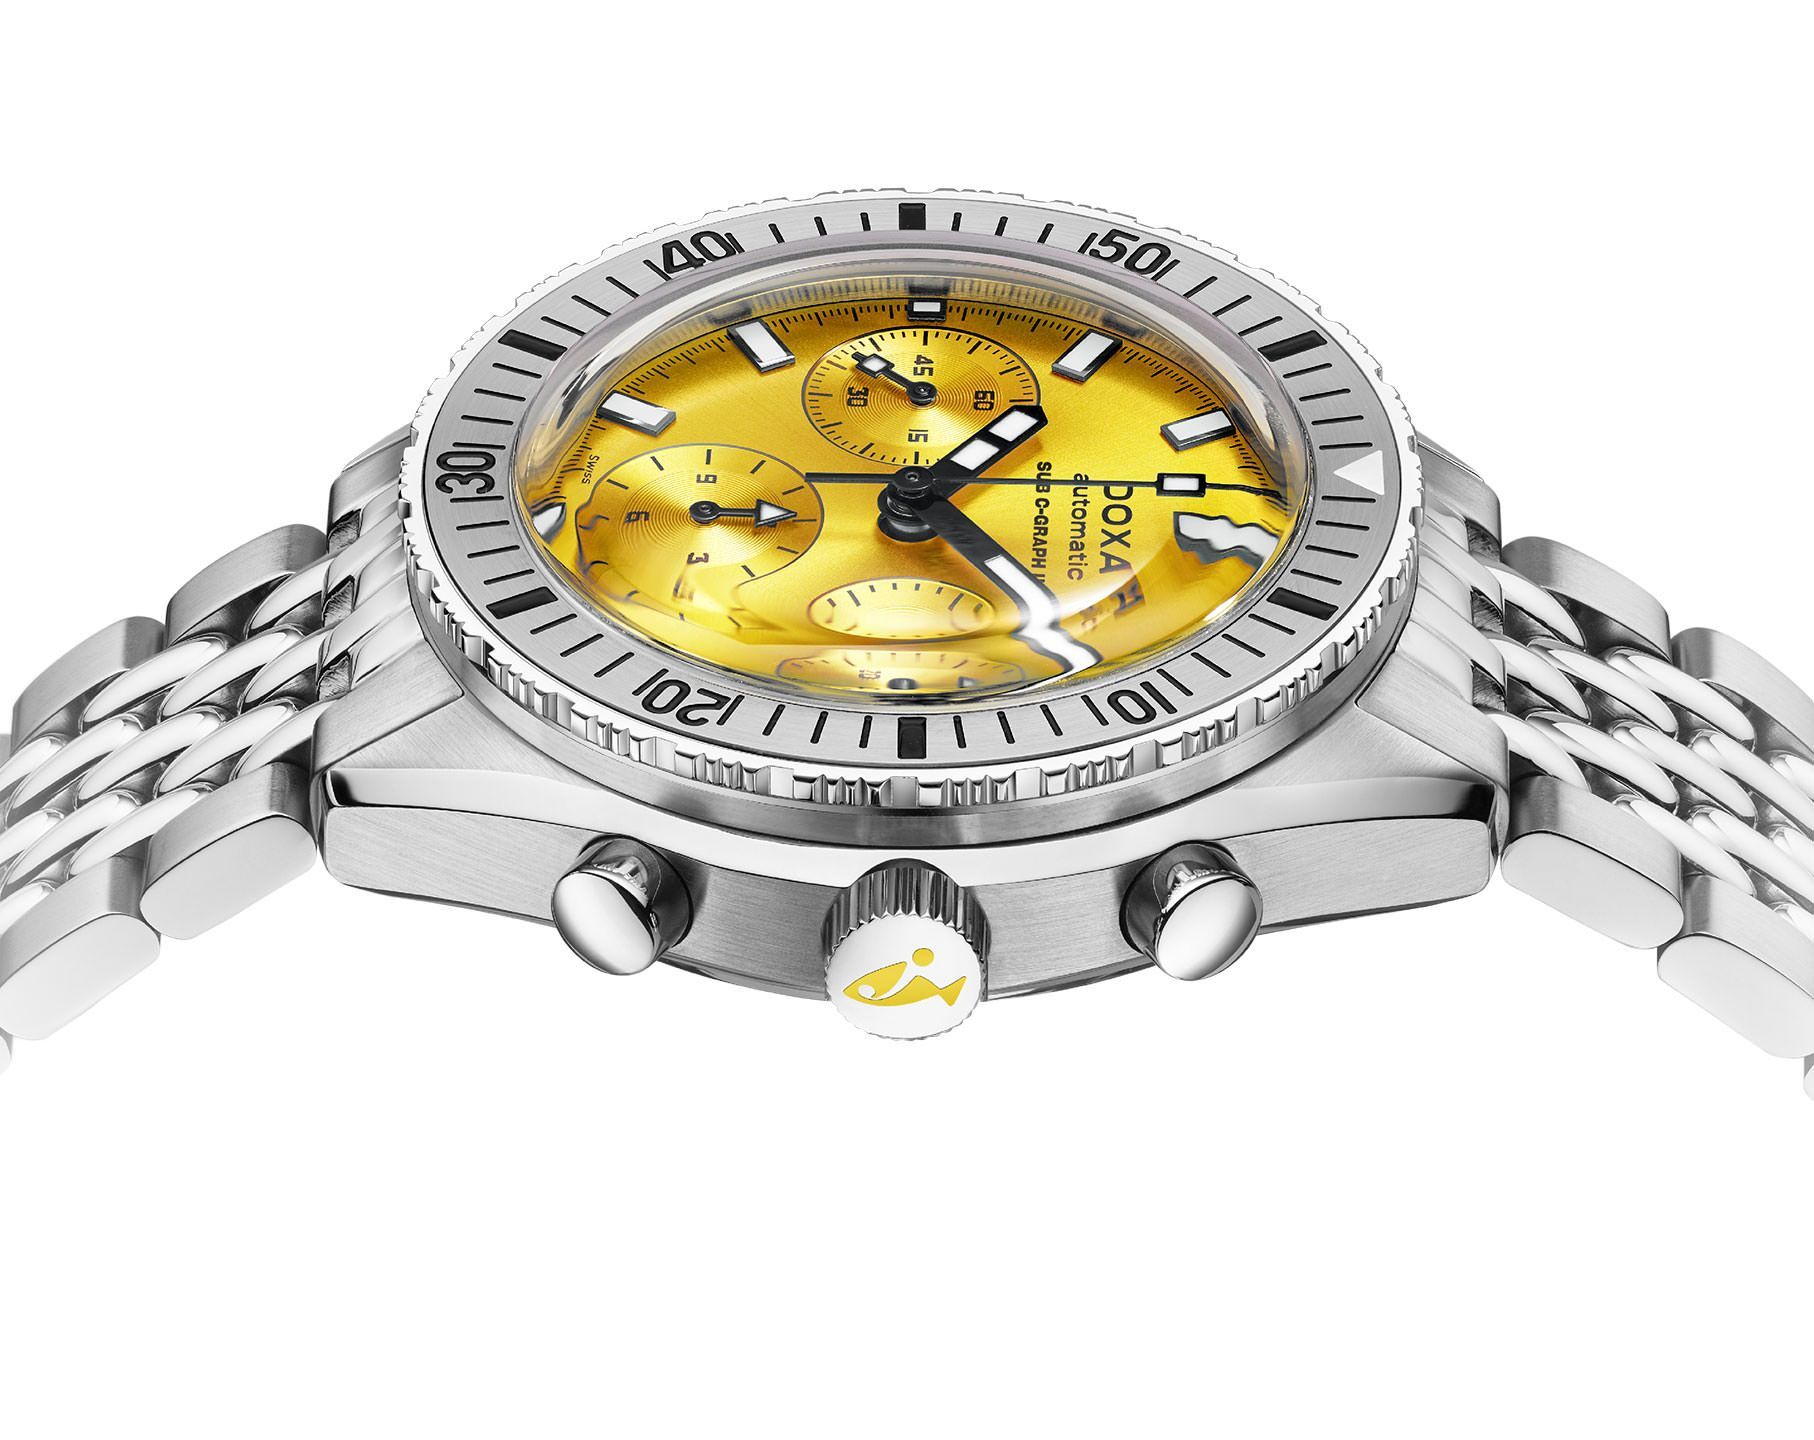 Doxa SUB 200 C-GRAPH II Divingstar Yellow Dial 42 mm Automatic Watch For Men - 3